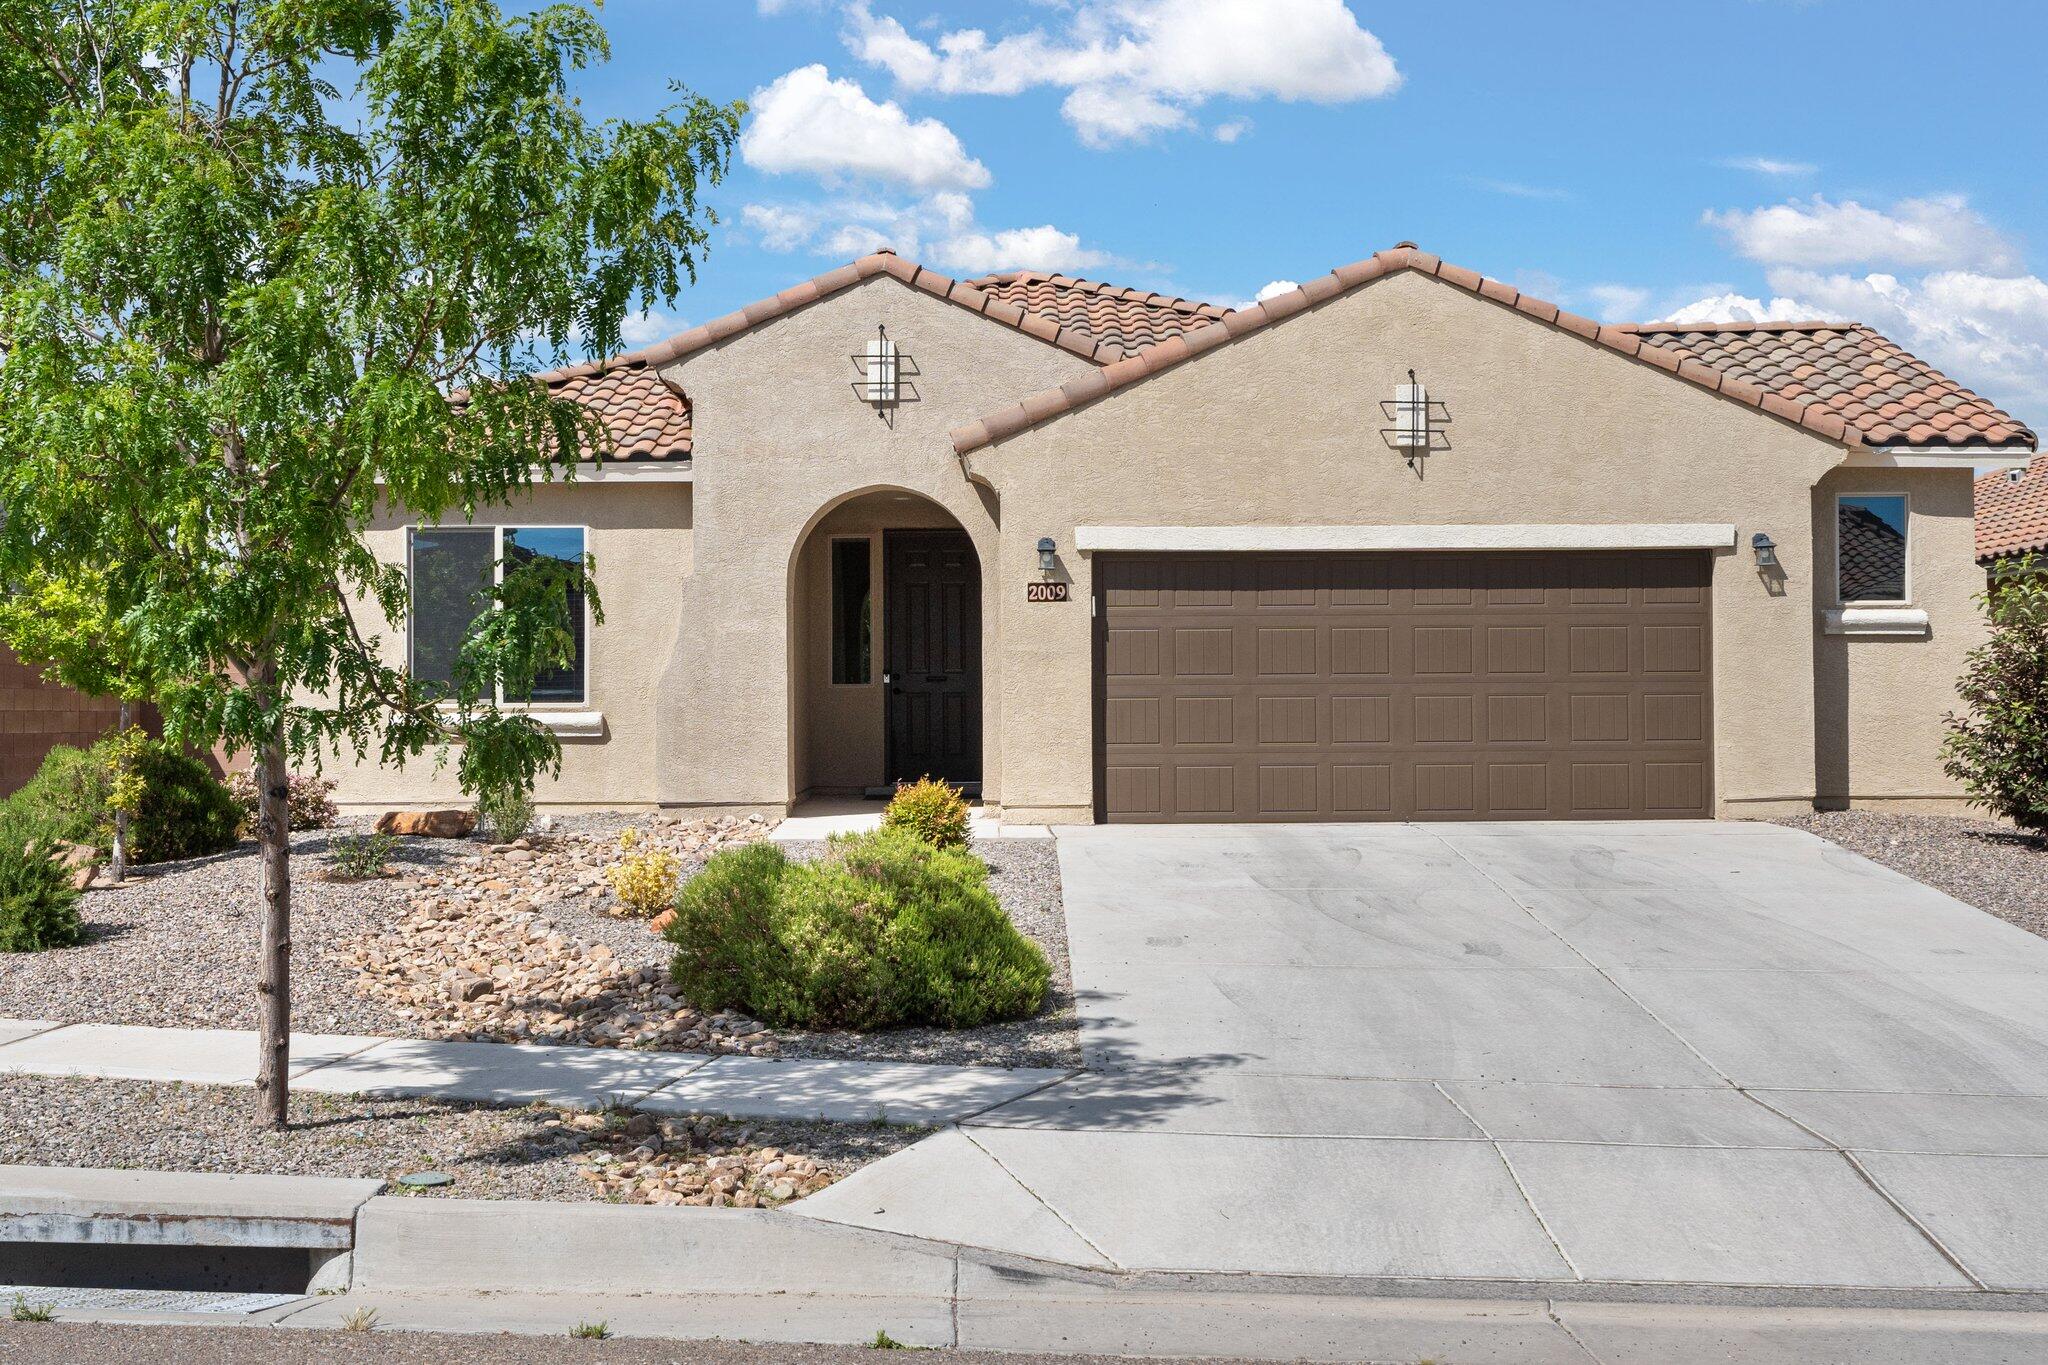 Welcome to the picturesque Mirehaven subdivision! This single-story home features four bedrooms, two bathrooms, and a 2.5 tandem garage with an 8-foot door, making it ideal for families. The Gateway floor plan boasts an open concept, creating a wonderfully spacious atmosphere. Indulge in the gourmet kitchen, complete with a sizable granite island, built-in appliances, and ample cabinet space. Cozy up by the fireplace in the great room! The primary bedroom showcases an ensuite bathroom with a large shower. Step outside and unwind in the backyard with its covered patio. Conveniently located near I-40, shops, and dining. Schedule your showing today!